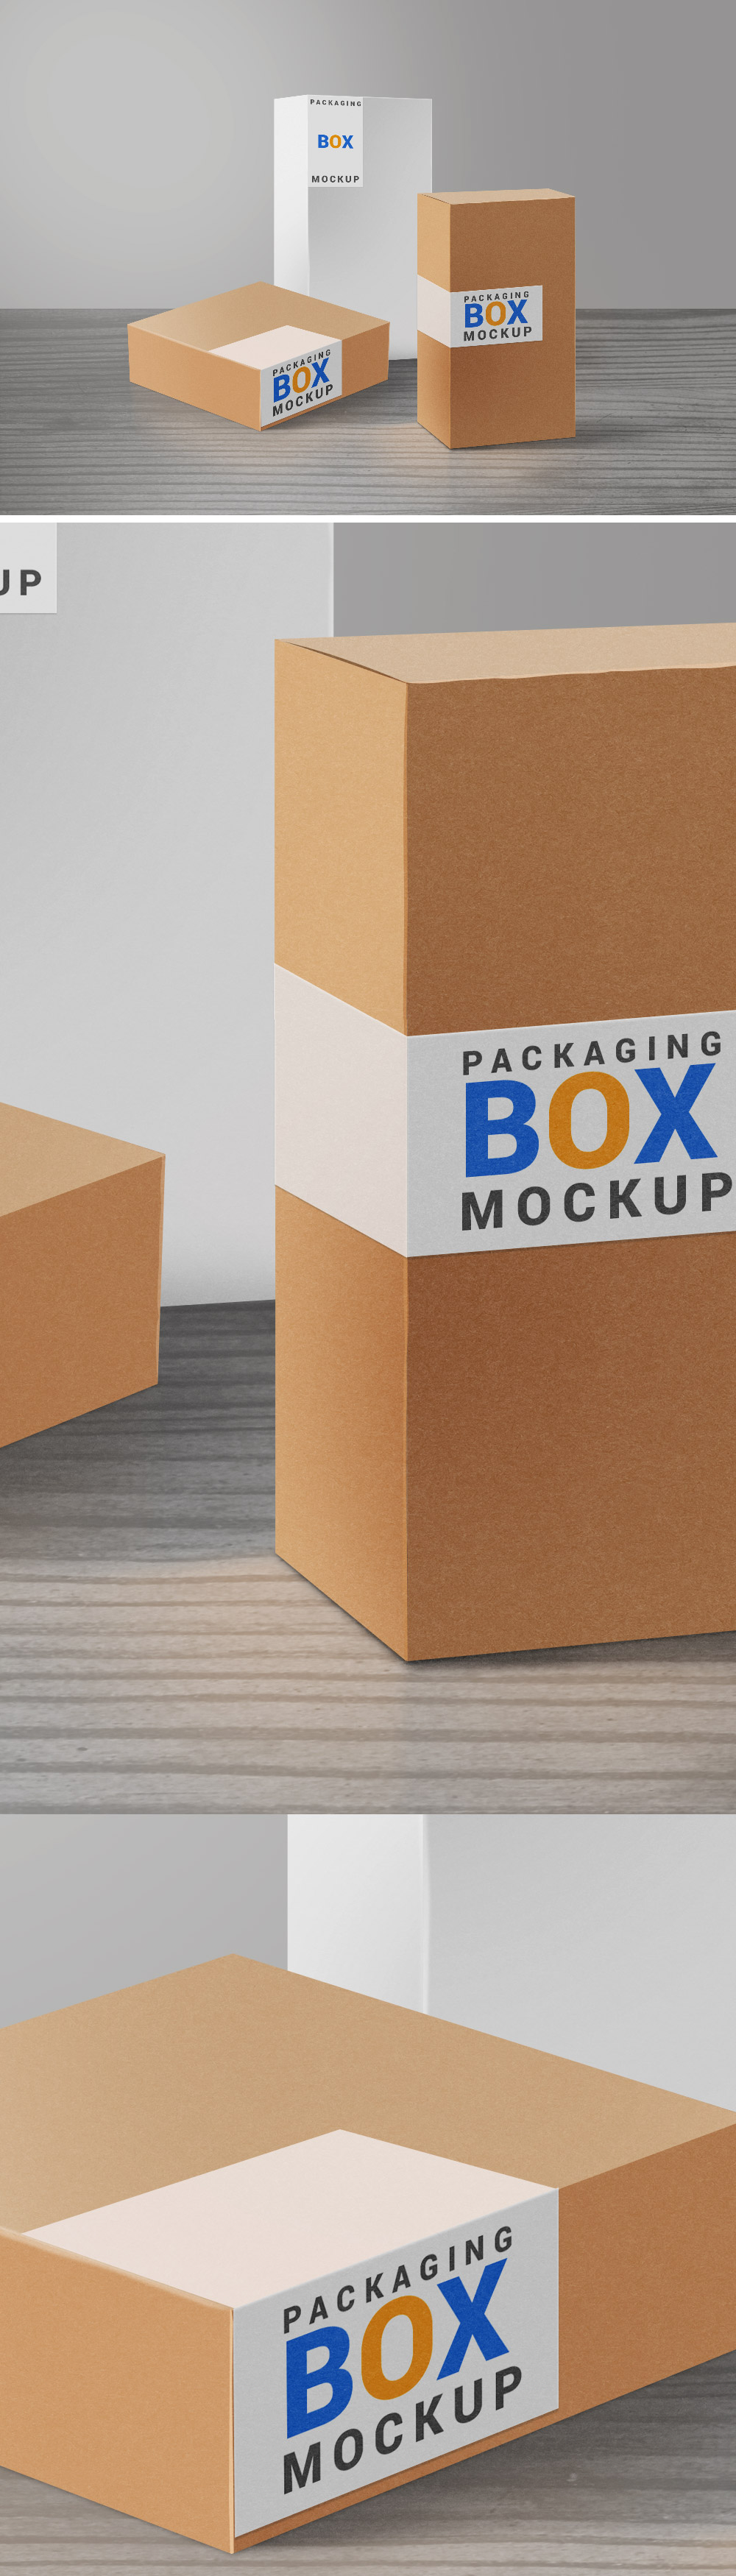 Download Product Packaging Boxes PSD Mockup - GraphicsFuel